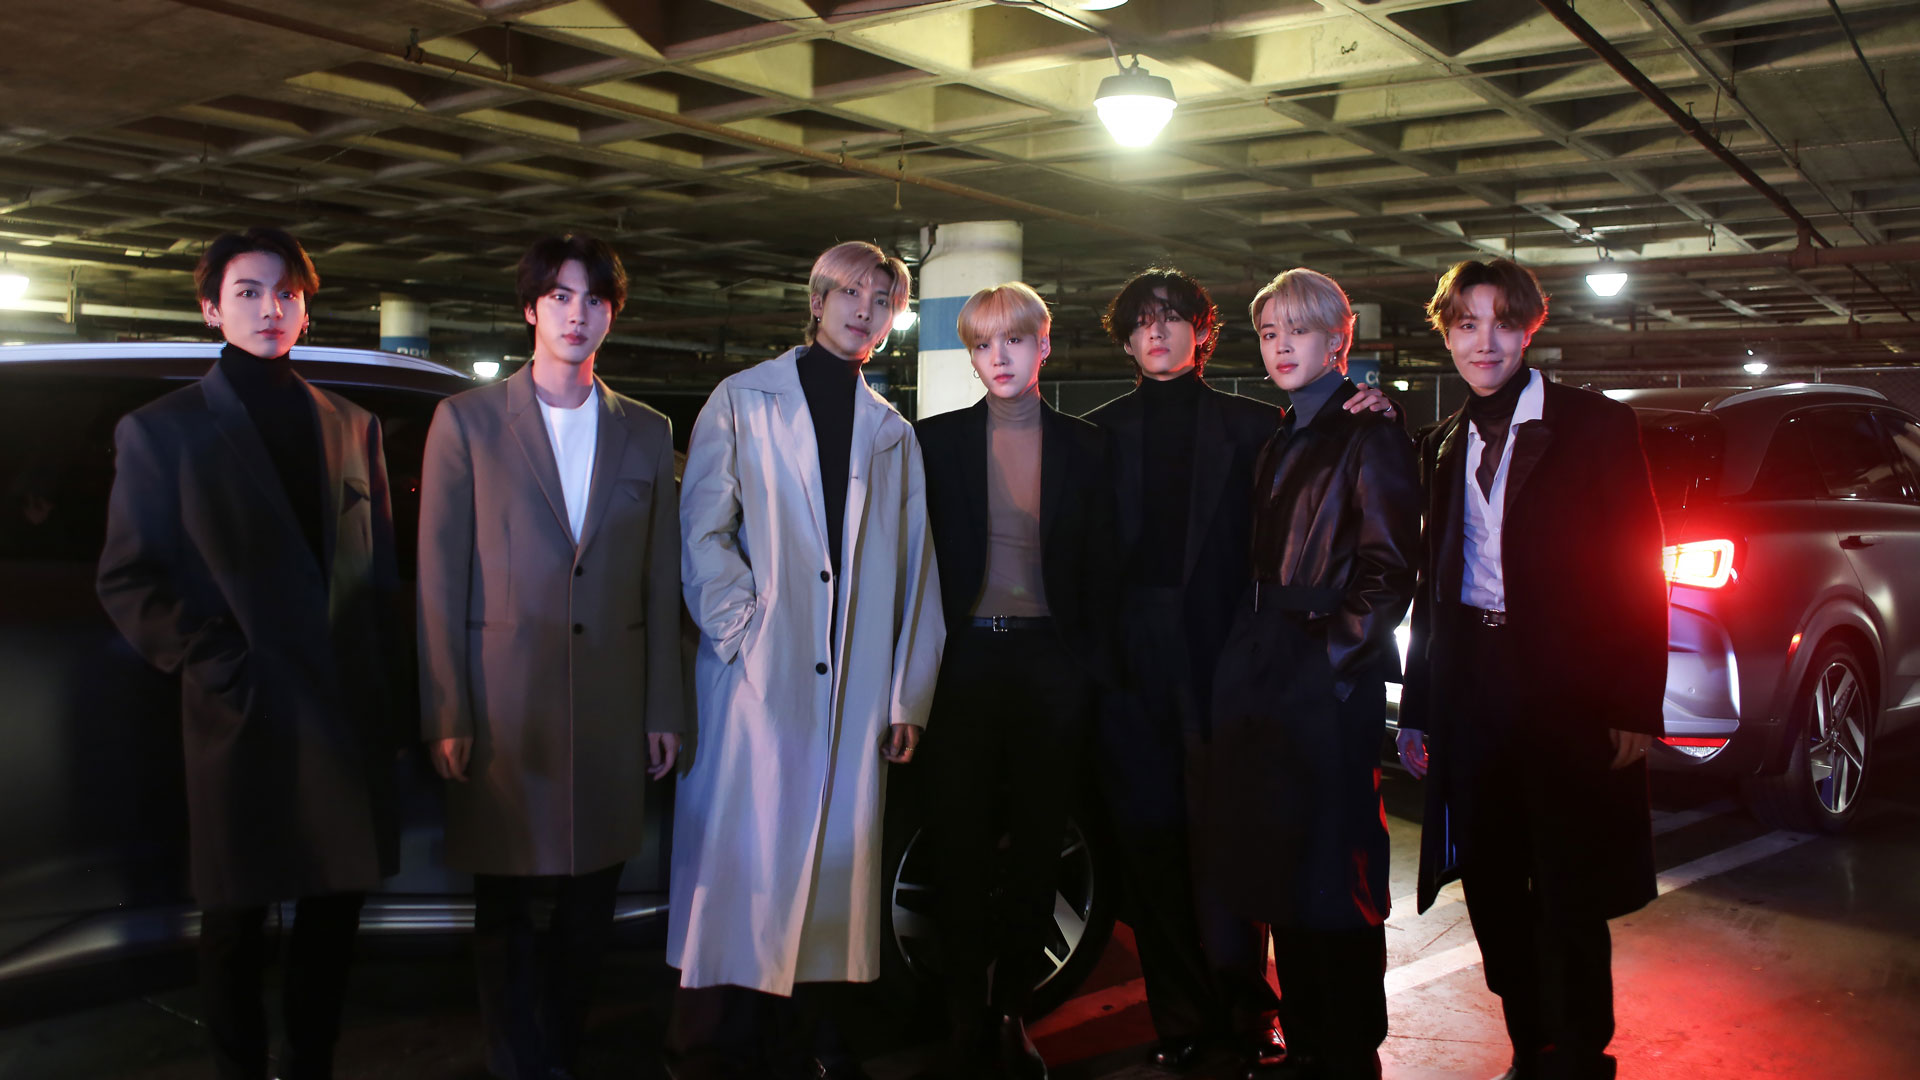 Hyundai Motor Appoints BTS as Global Brand Ambassadors of the All-New  Flagship SUV 'Palisade'. Hyundai to unveil Palisade with a special…